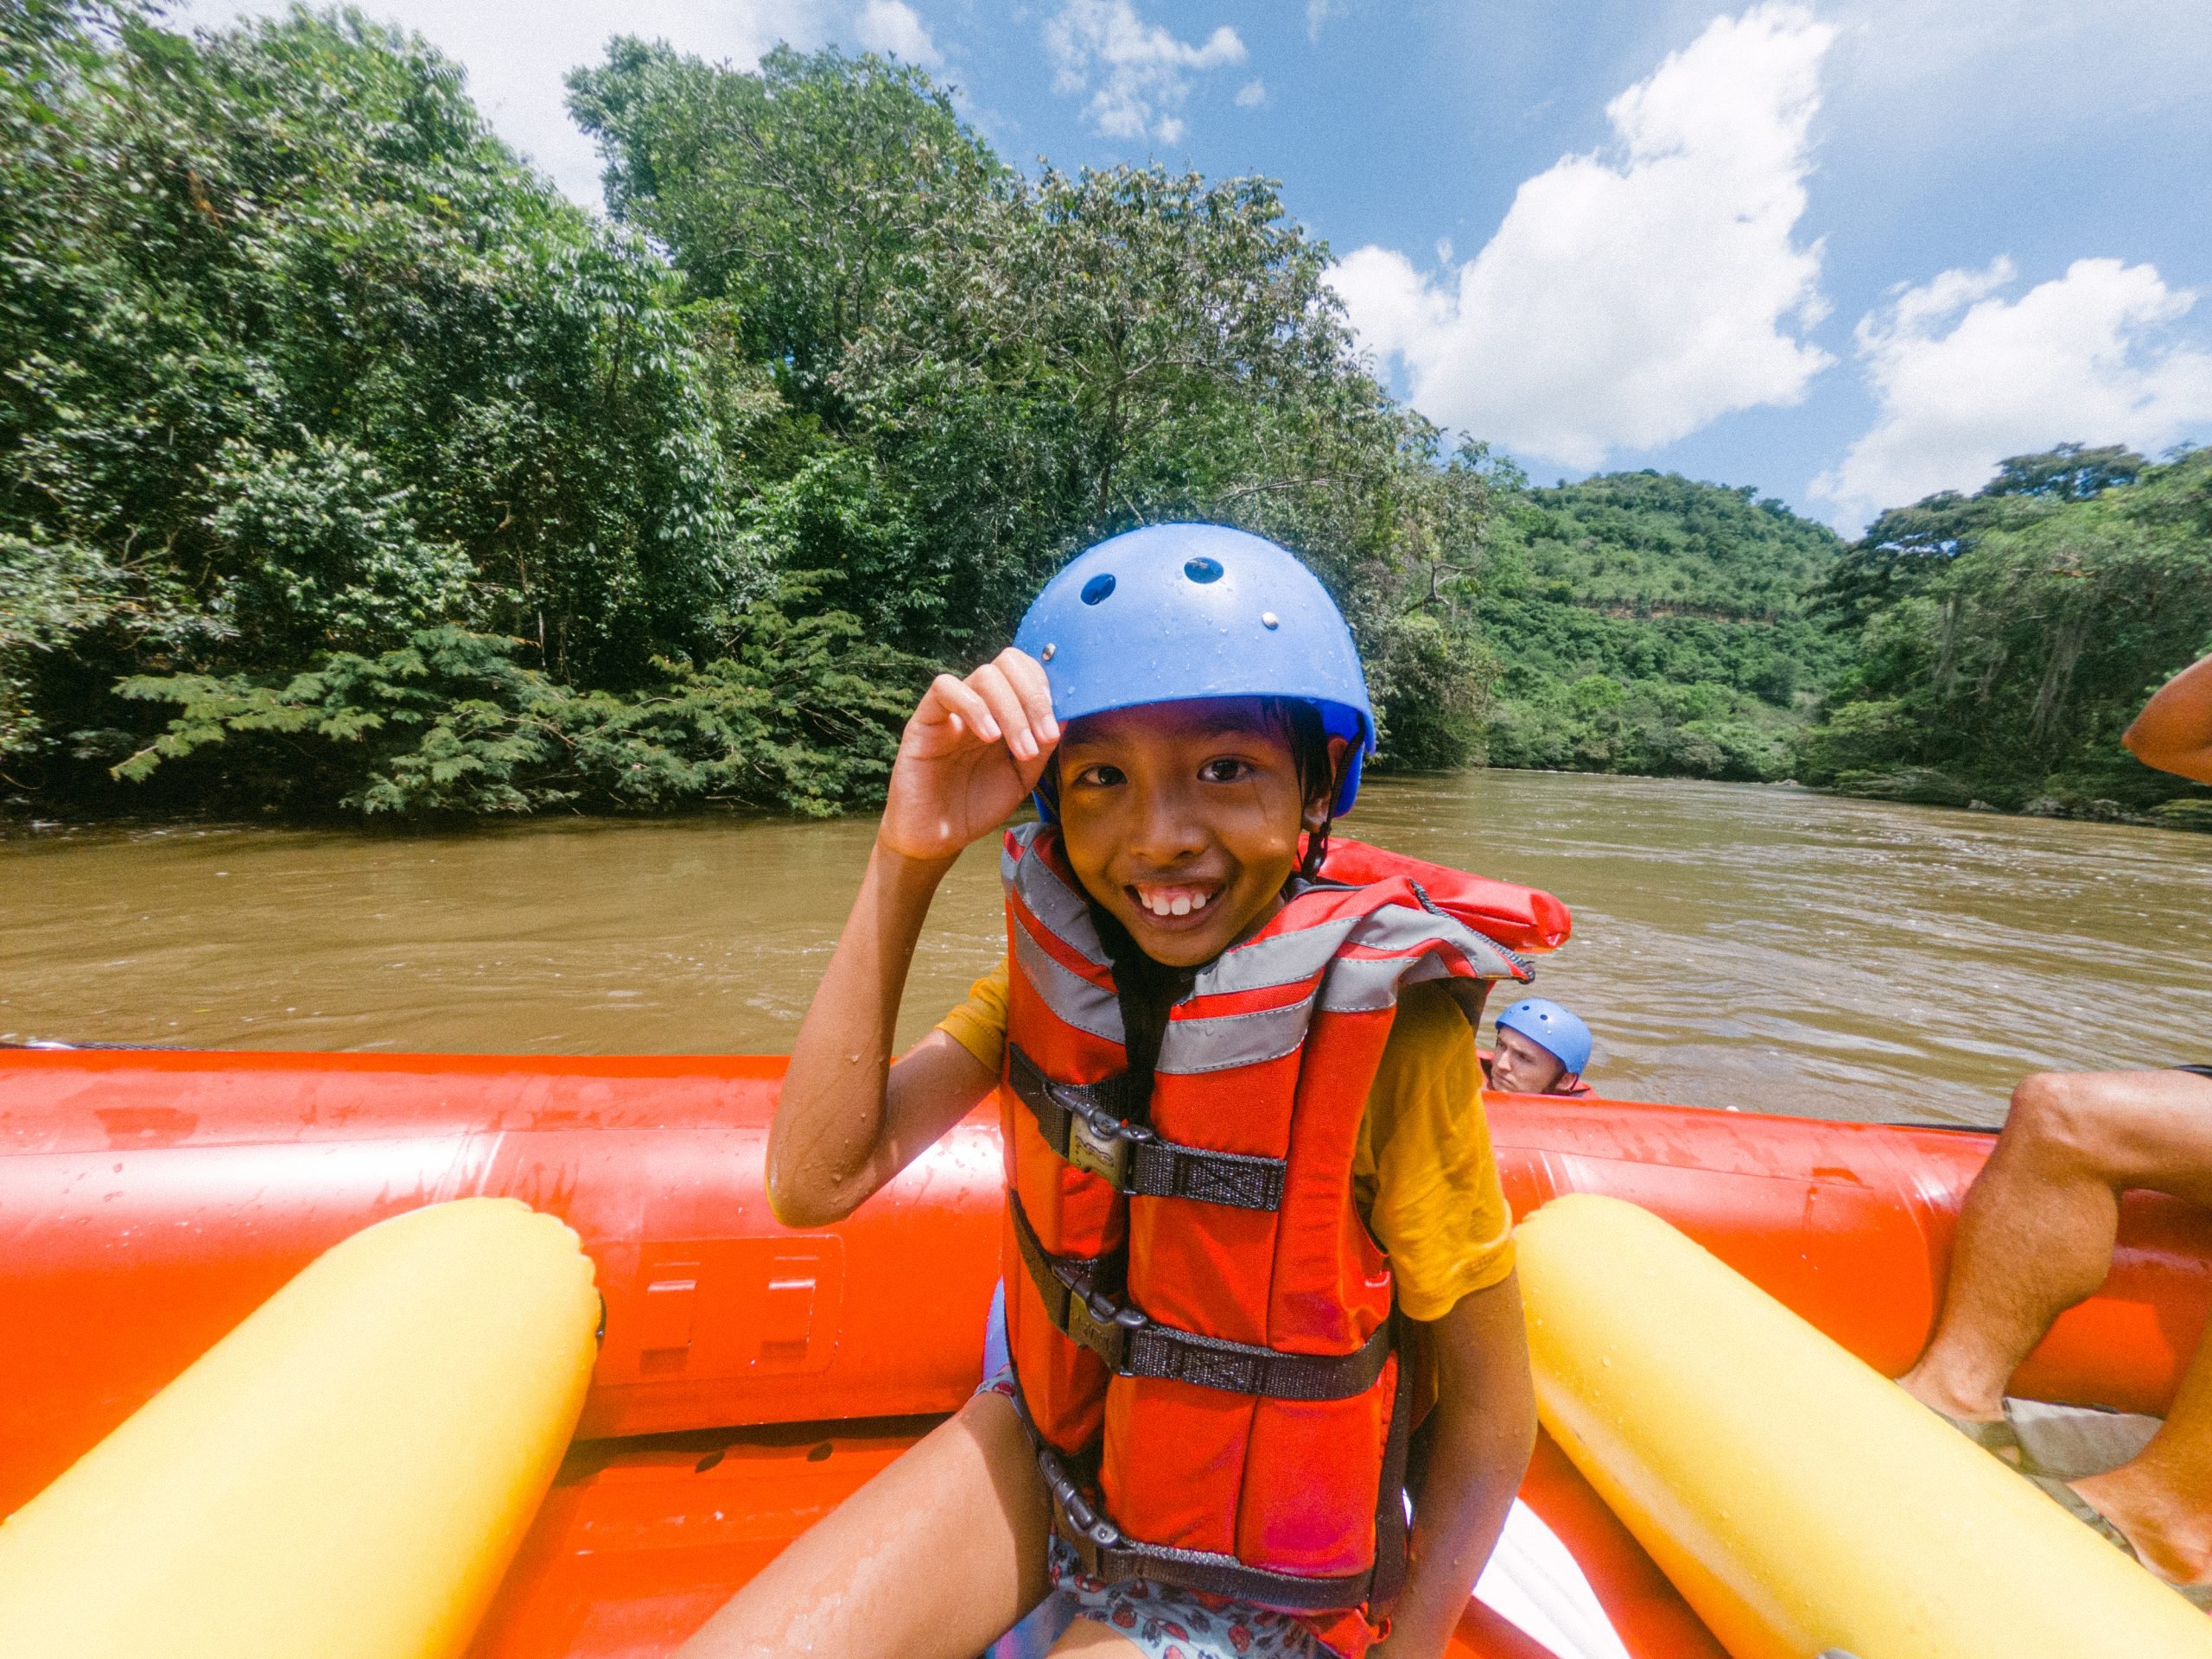 Rafting in San Gil, booking activities to din San Gil, things to do in san gil colombia, what to do in san gil, san gil colombia, adventure in san gil, prices activities in san gil, Macondo Hostel, Macondo Hostel in San Gil, where to stay in San Gil, San Gil hostel, 